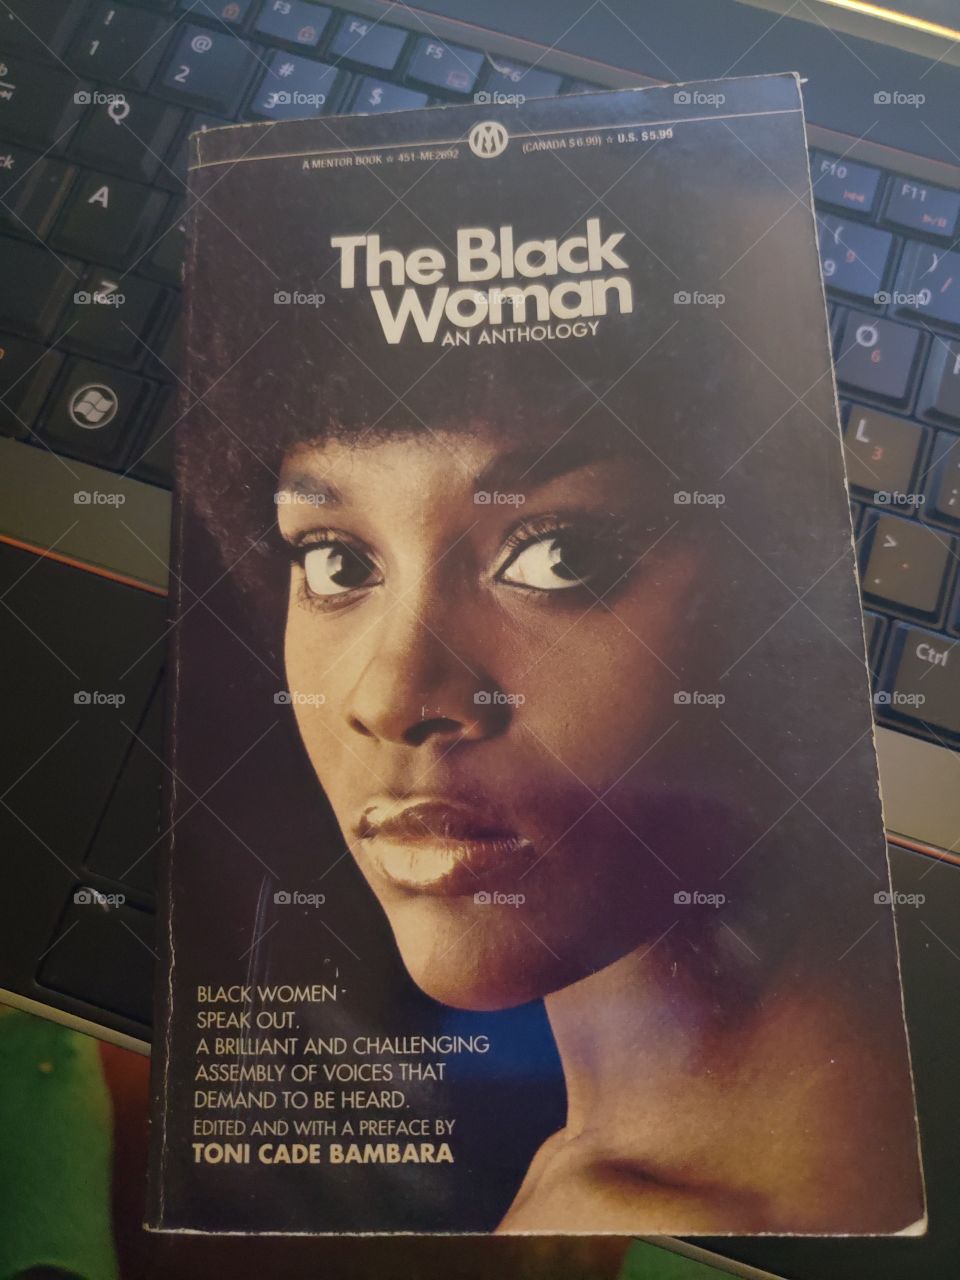 The Black Woman, book